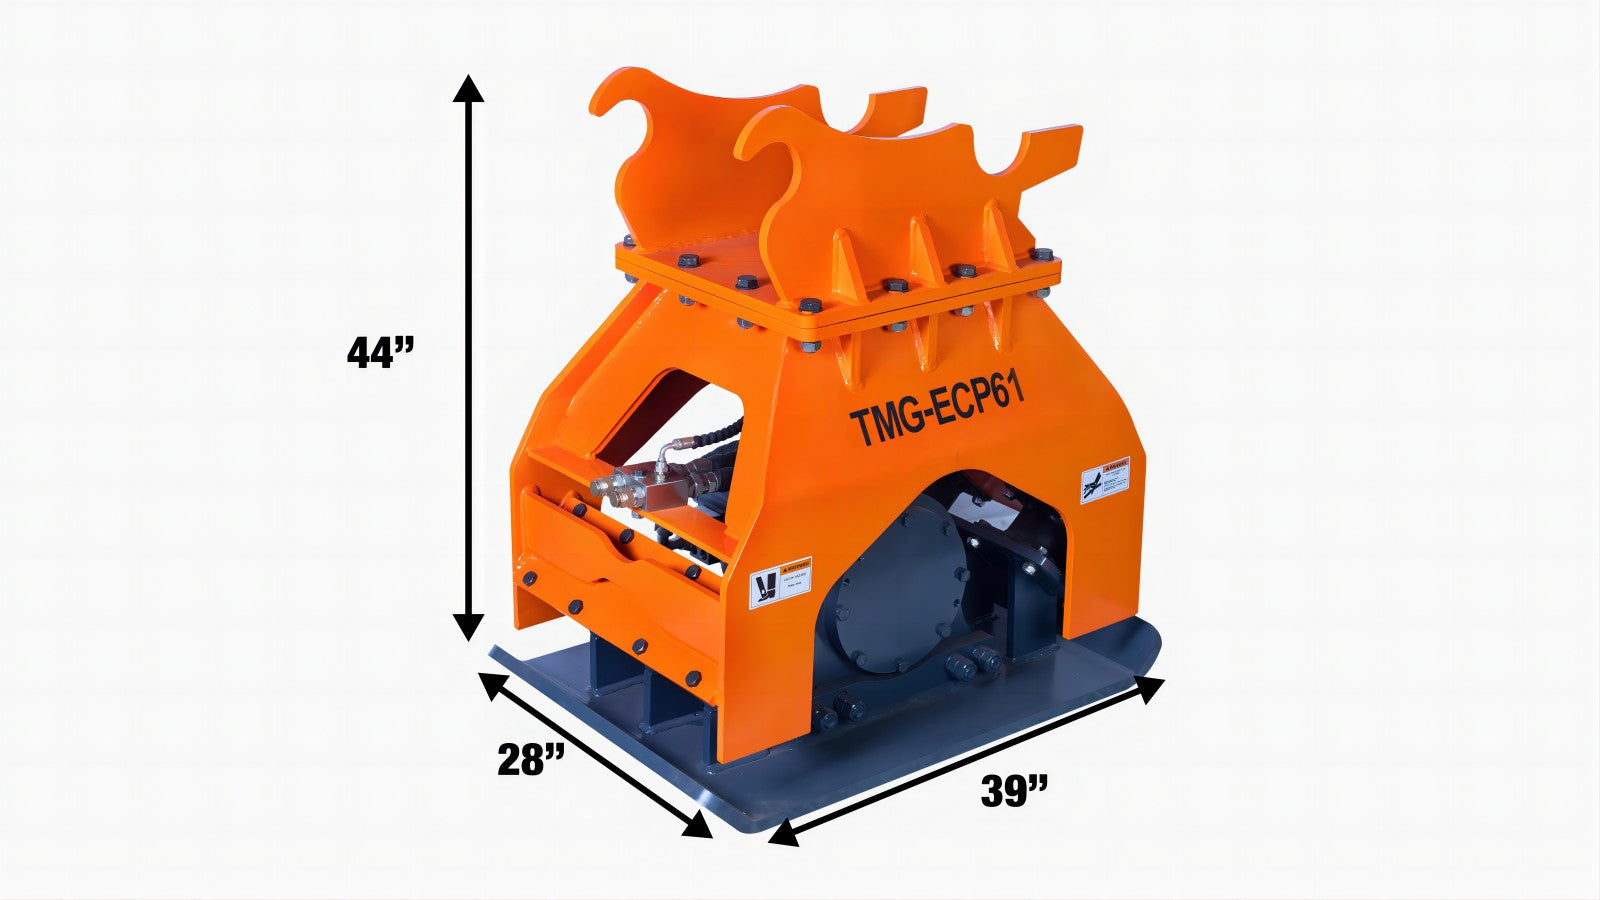 TMG Industrial 22,000-lb Hydraulic Plate Compactor, 10-16 Ton Excavator Weight, 48” Compact Capacity, TMG-ECP61-specifications-image